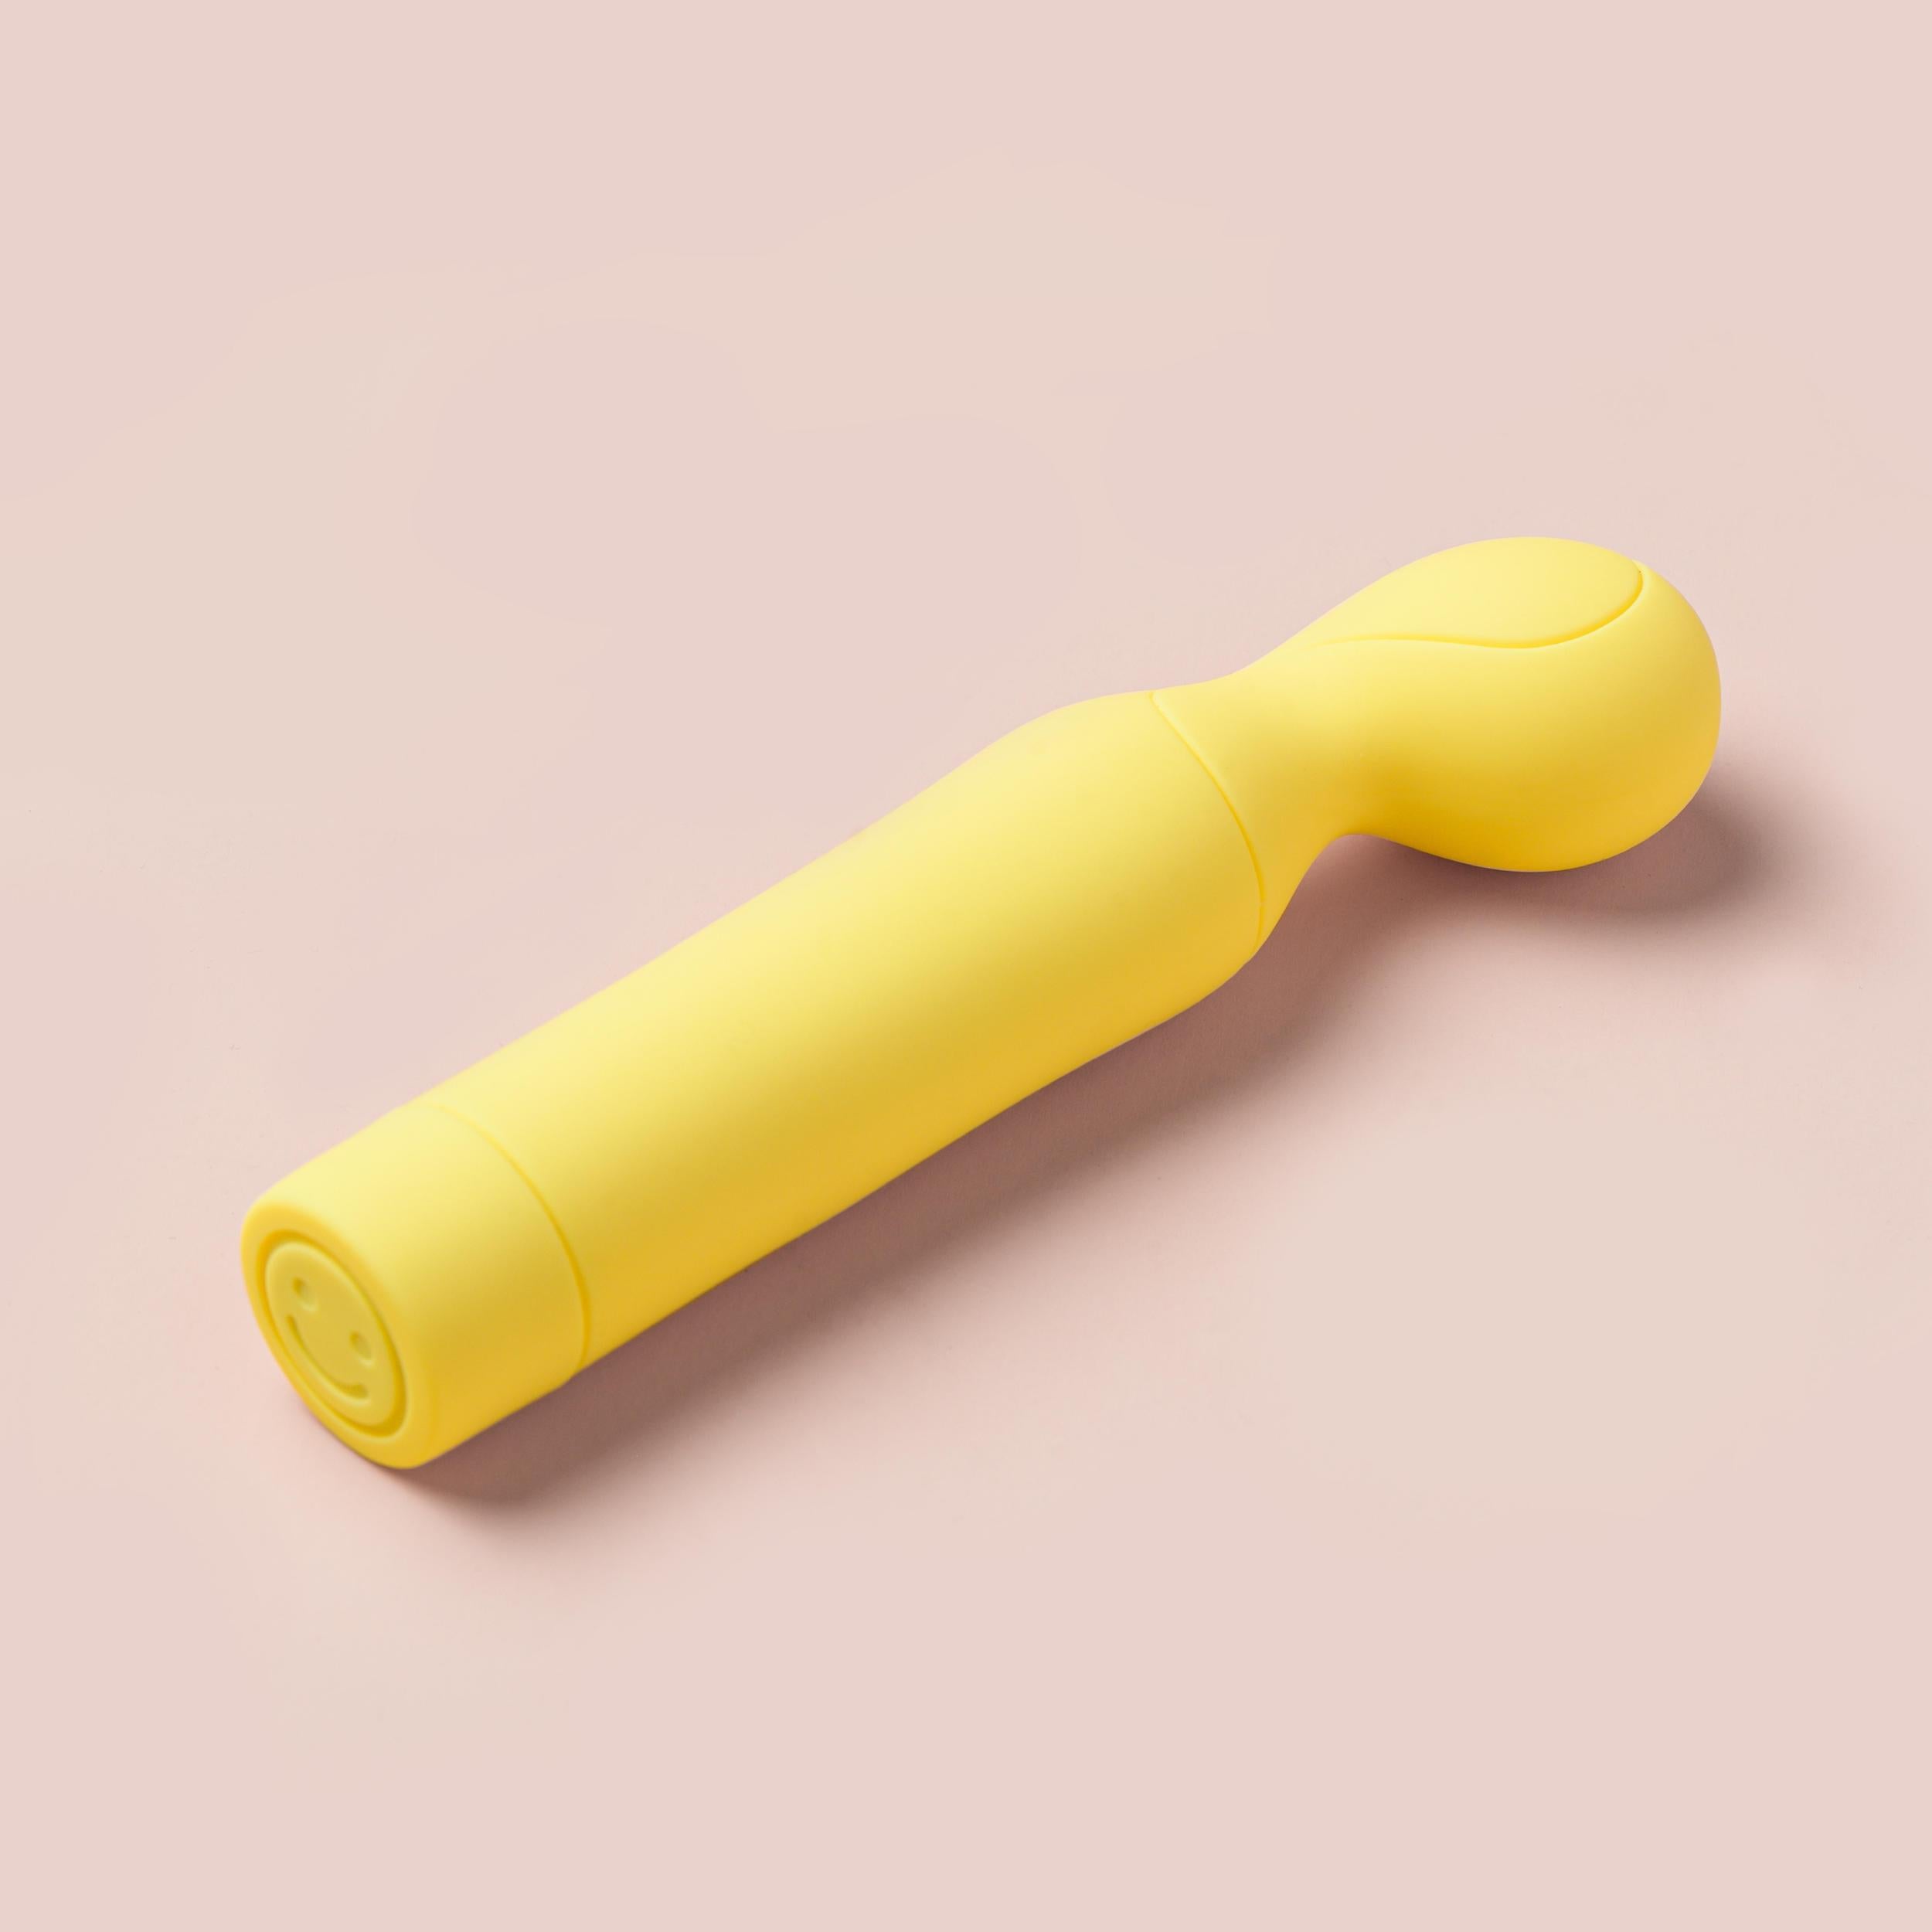 The Tennis Pro - Powerful G-Spot Vibrator for Women - Storming Gravity